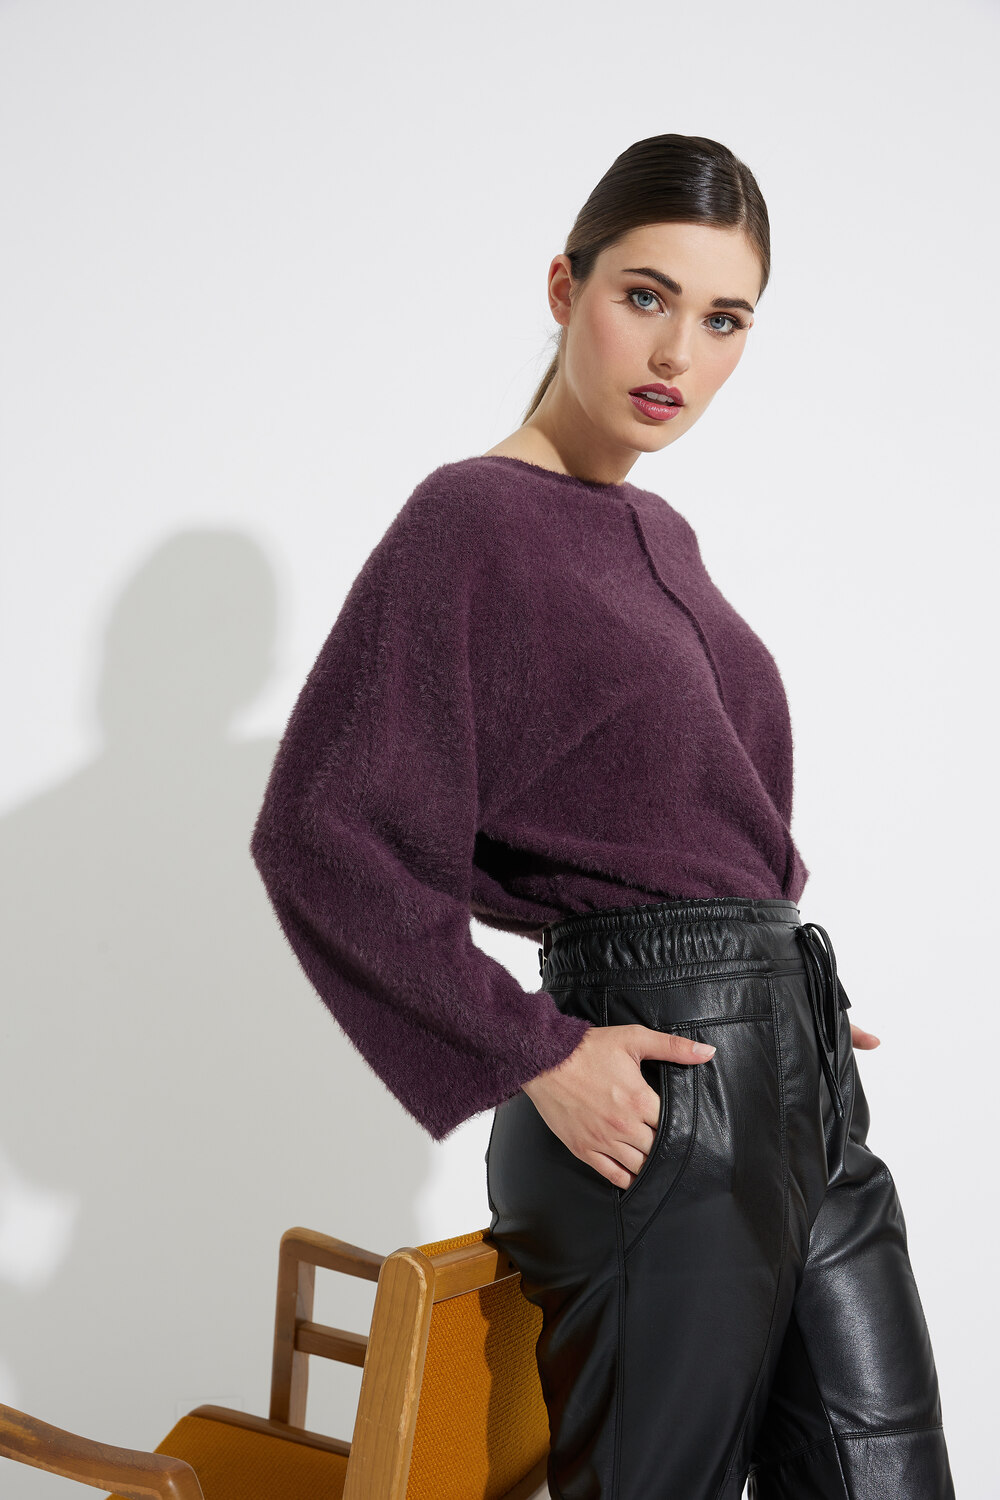 Wide Sleeve Every Day Sweater Style K1182. Plum